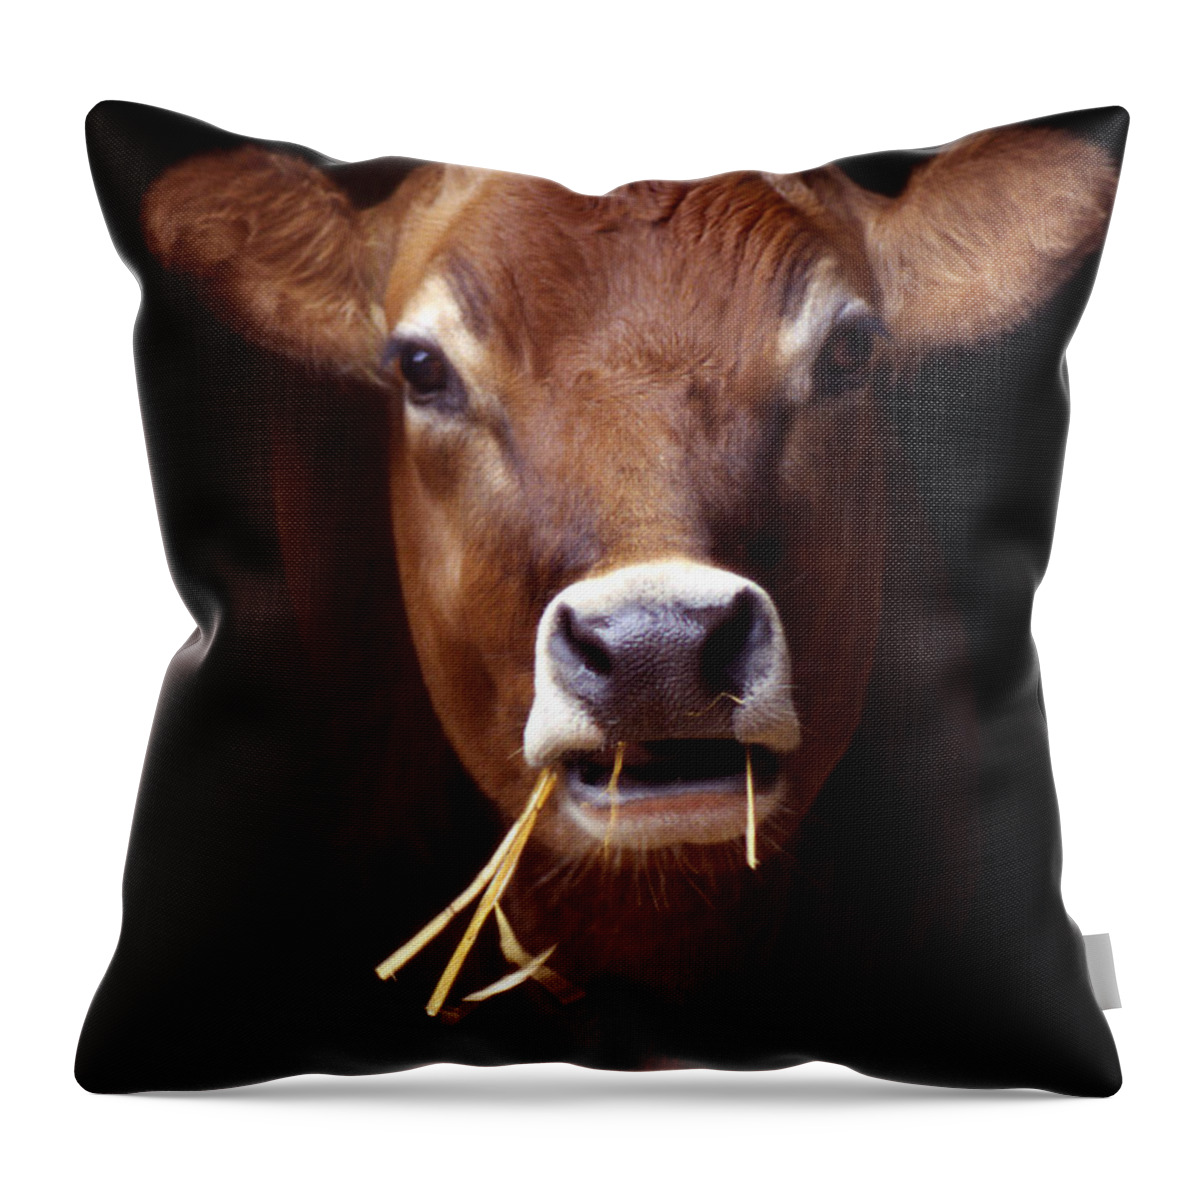 Touppe Throw Pillow featuring the photograph Toupee by Skip Willits